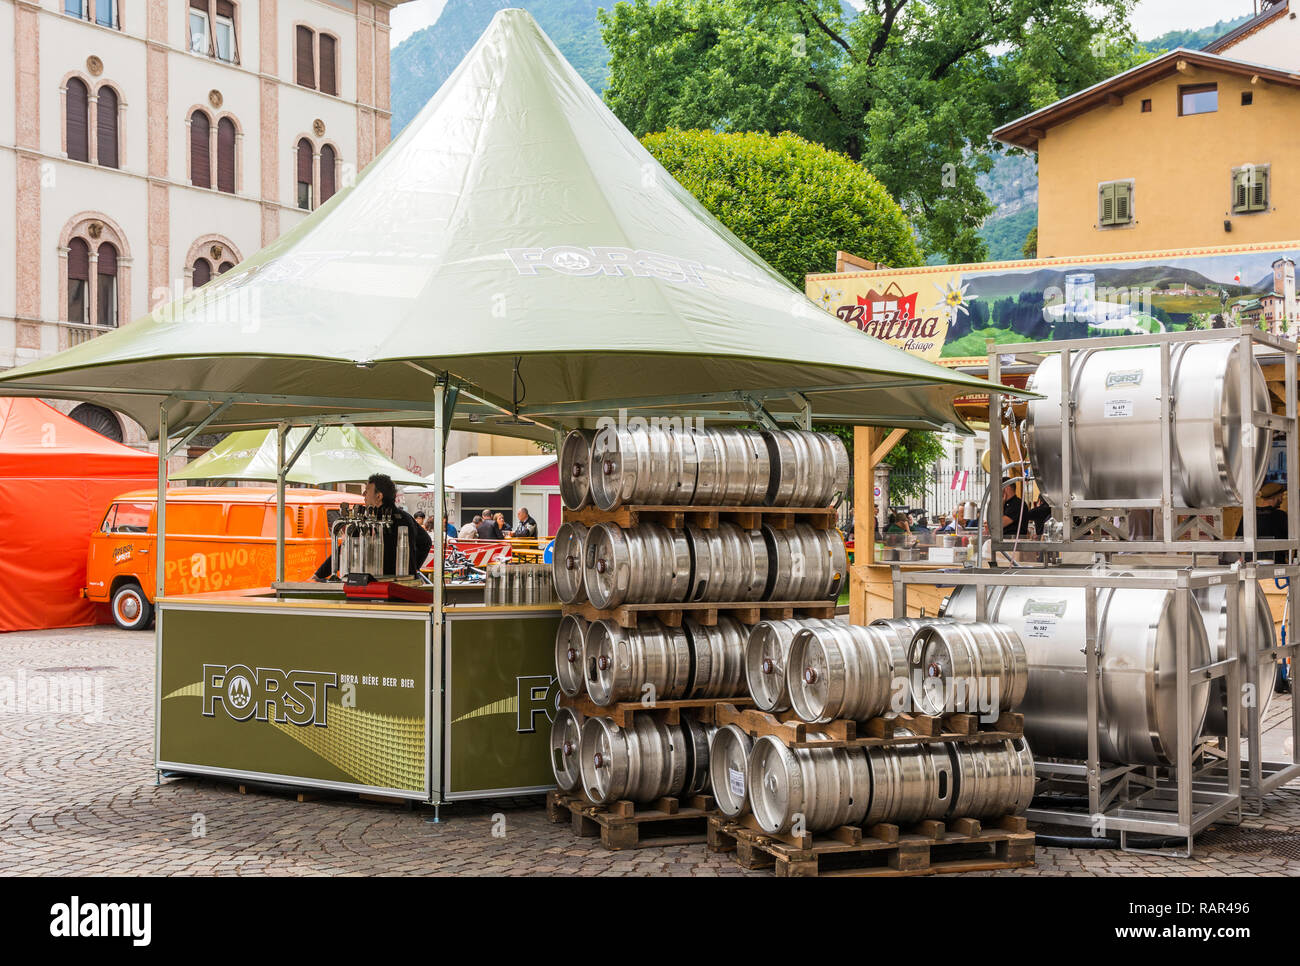 FORST beer stand in the square of Trento, Italy, northern Italy, Europe Stock Photo